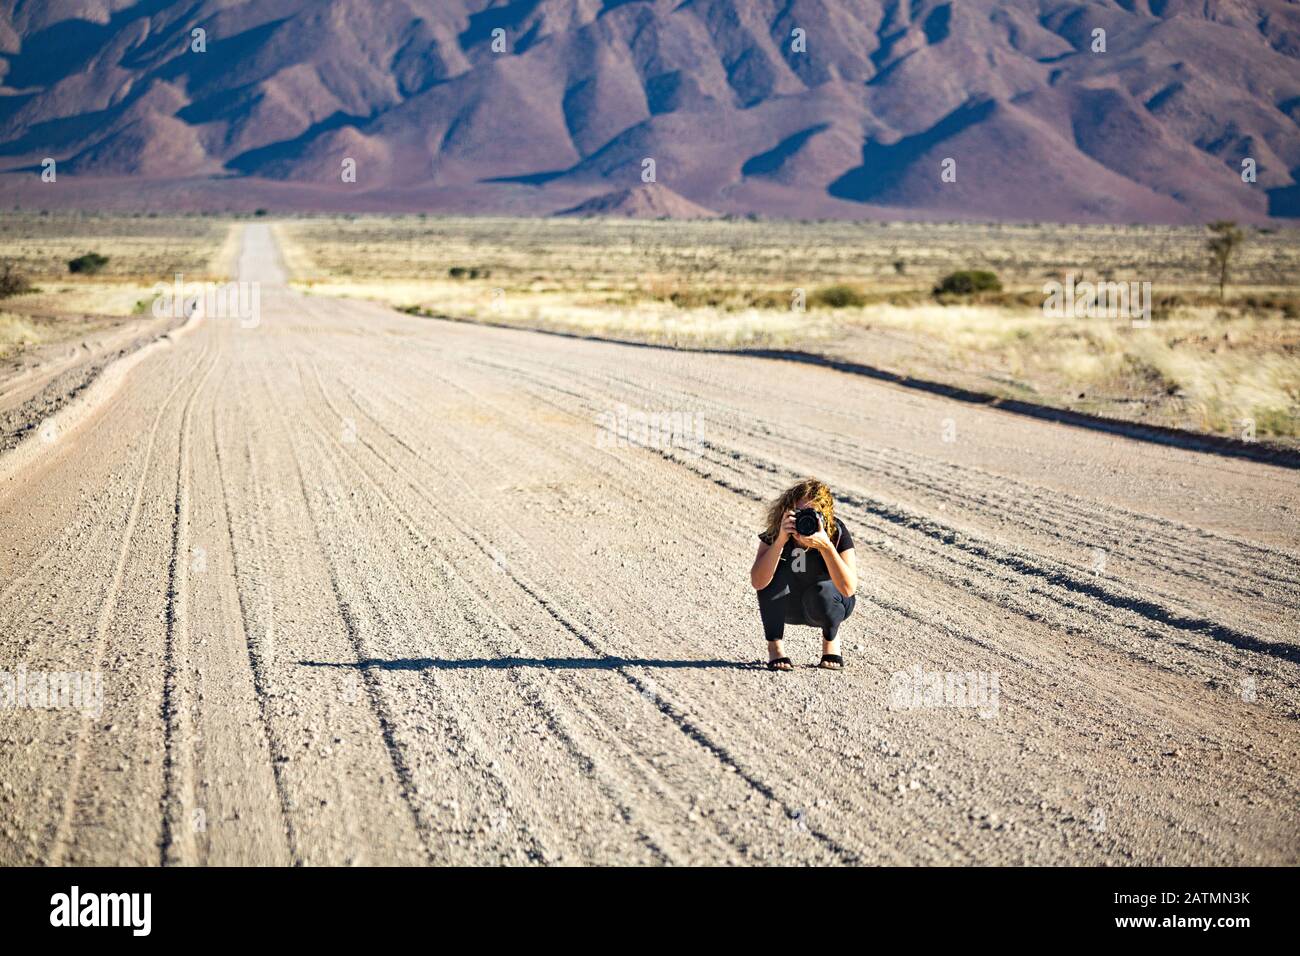 Young woman with a camera squatting in the middle of a gravel road that is leading into a mountainous landscape near Spreetshoogte Pass, Namibia, Afri Stock Photo